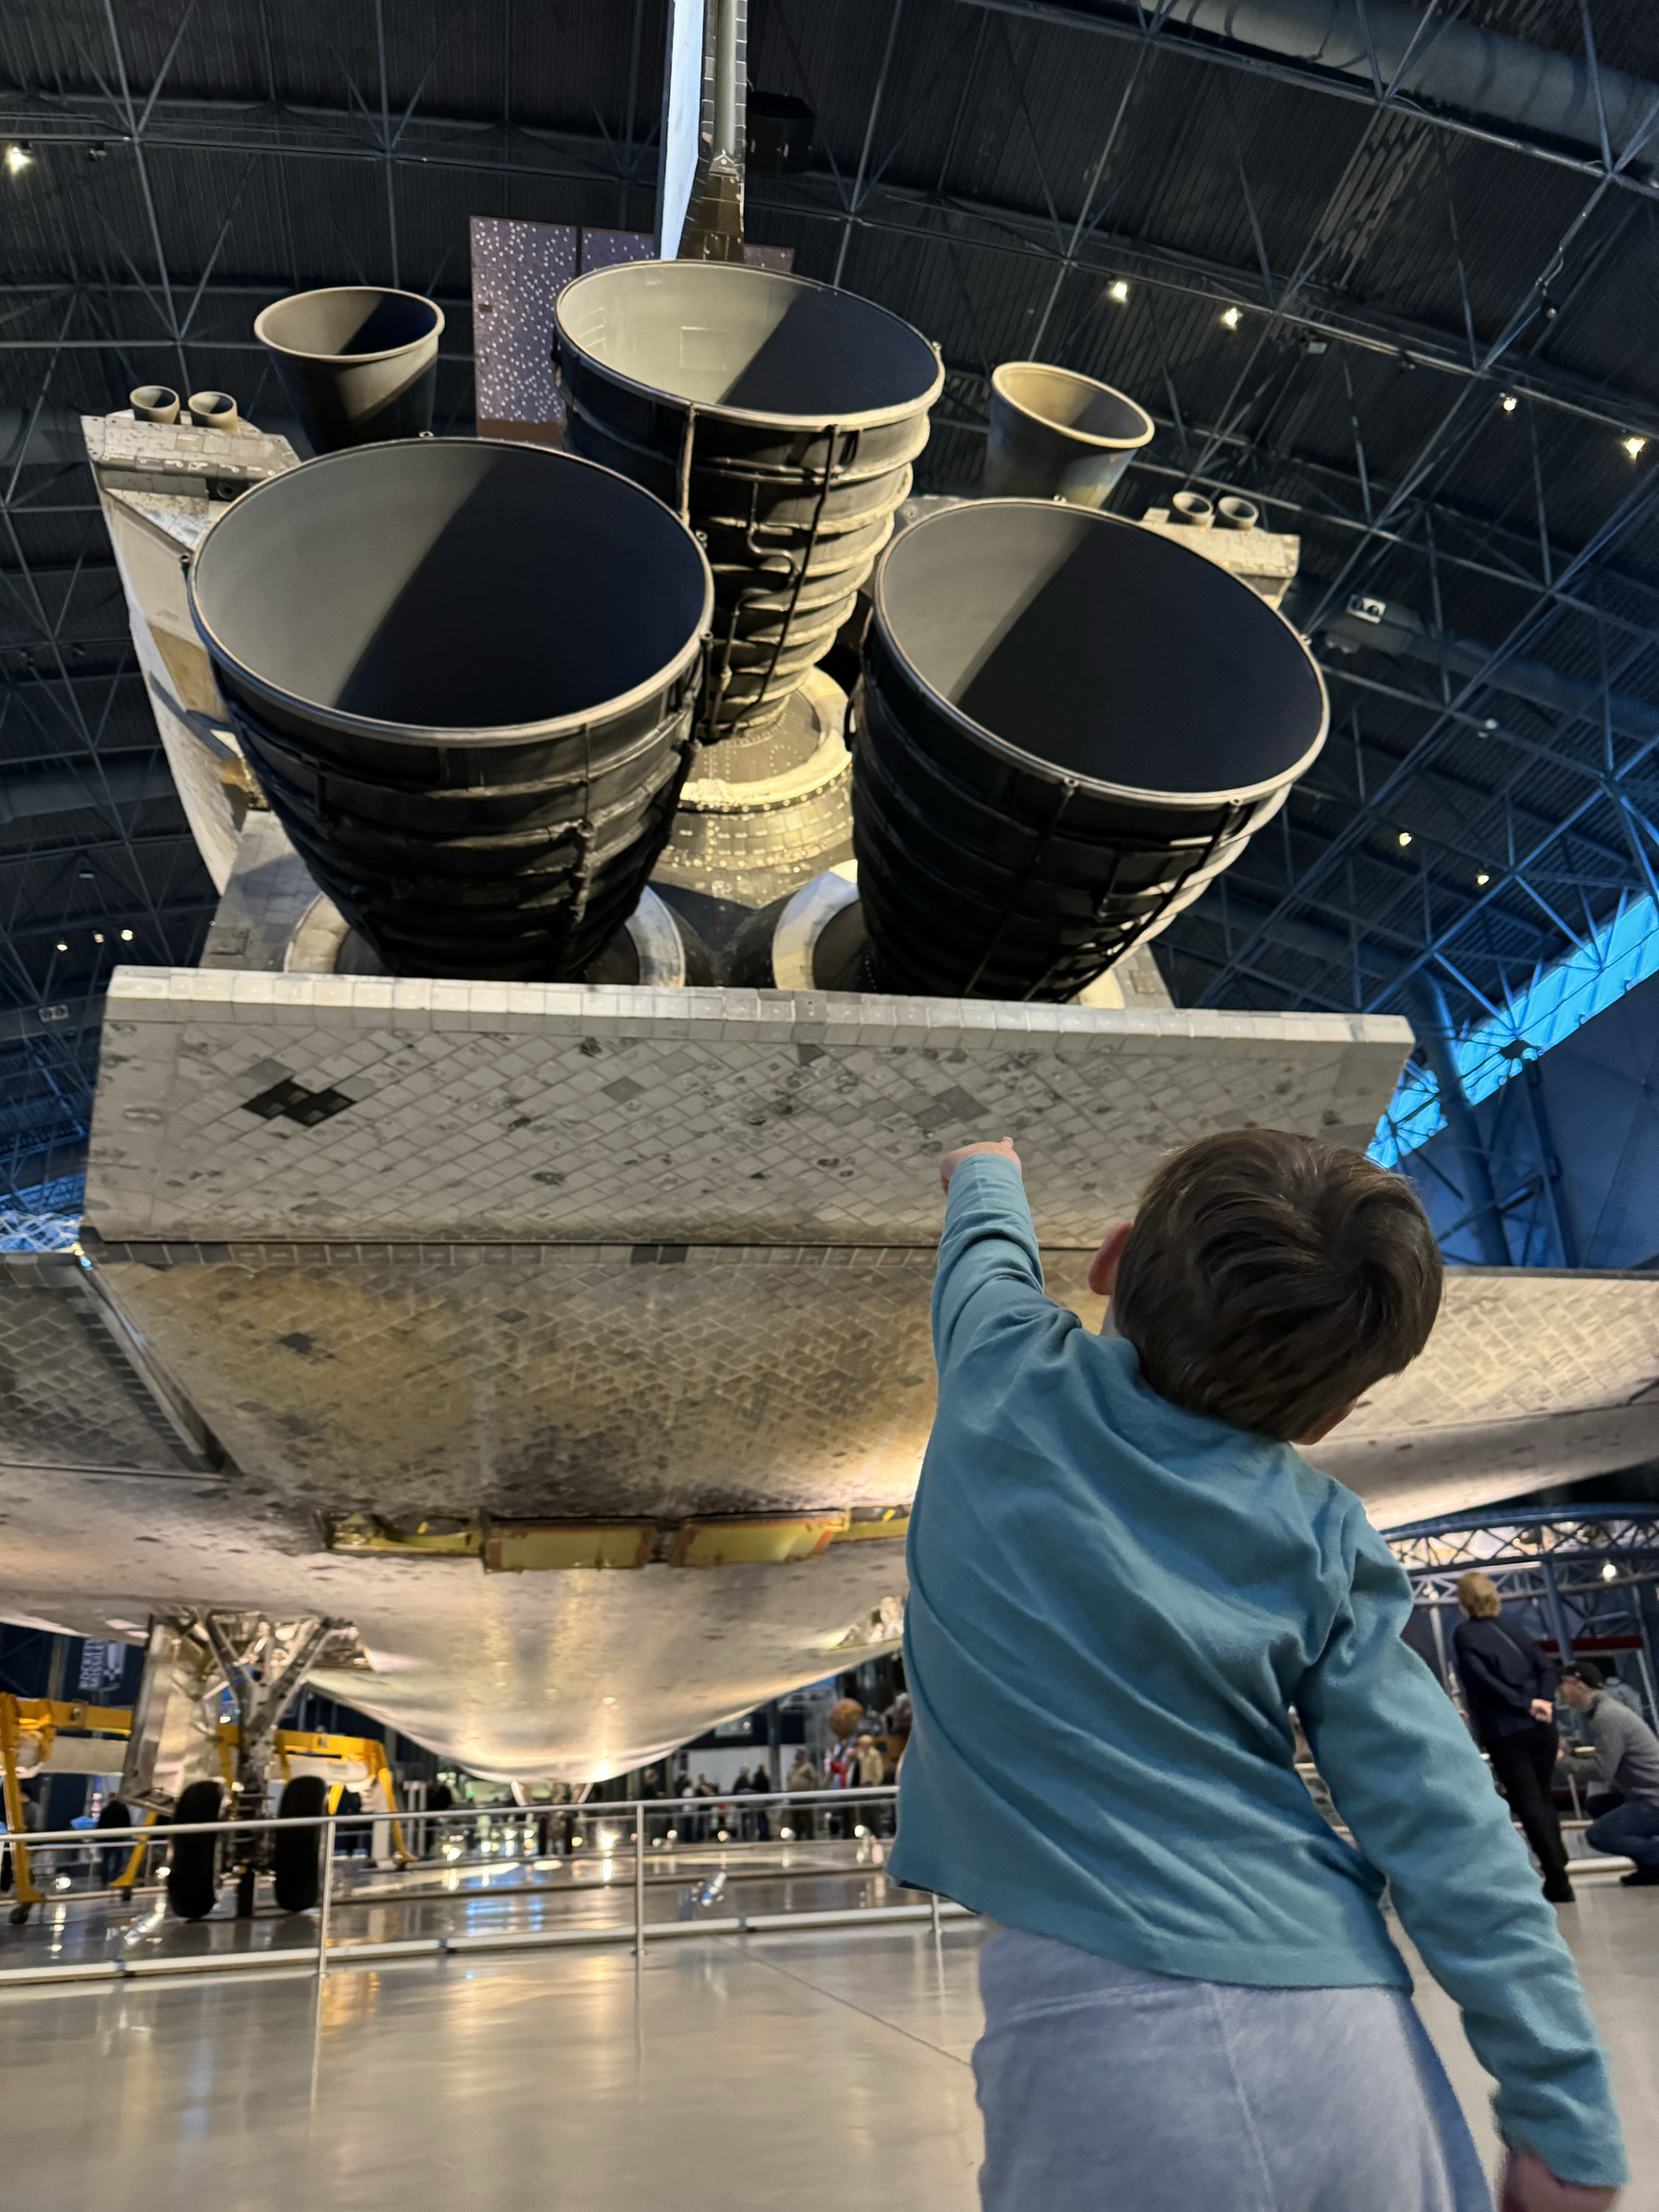 Jude pointing up at the space shuttle Discovery